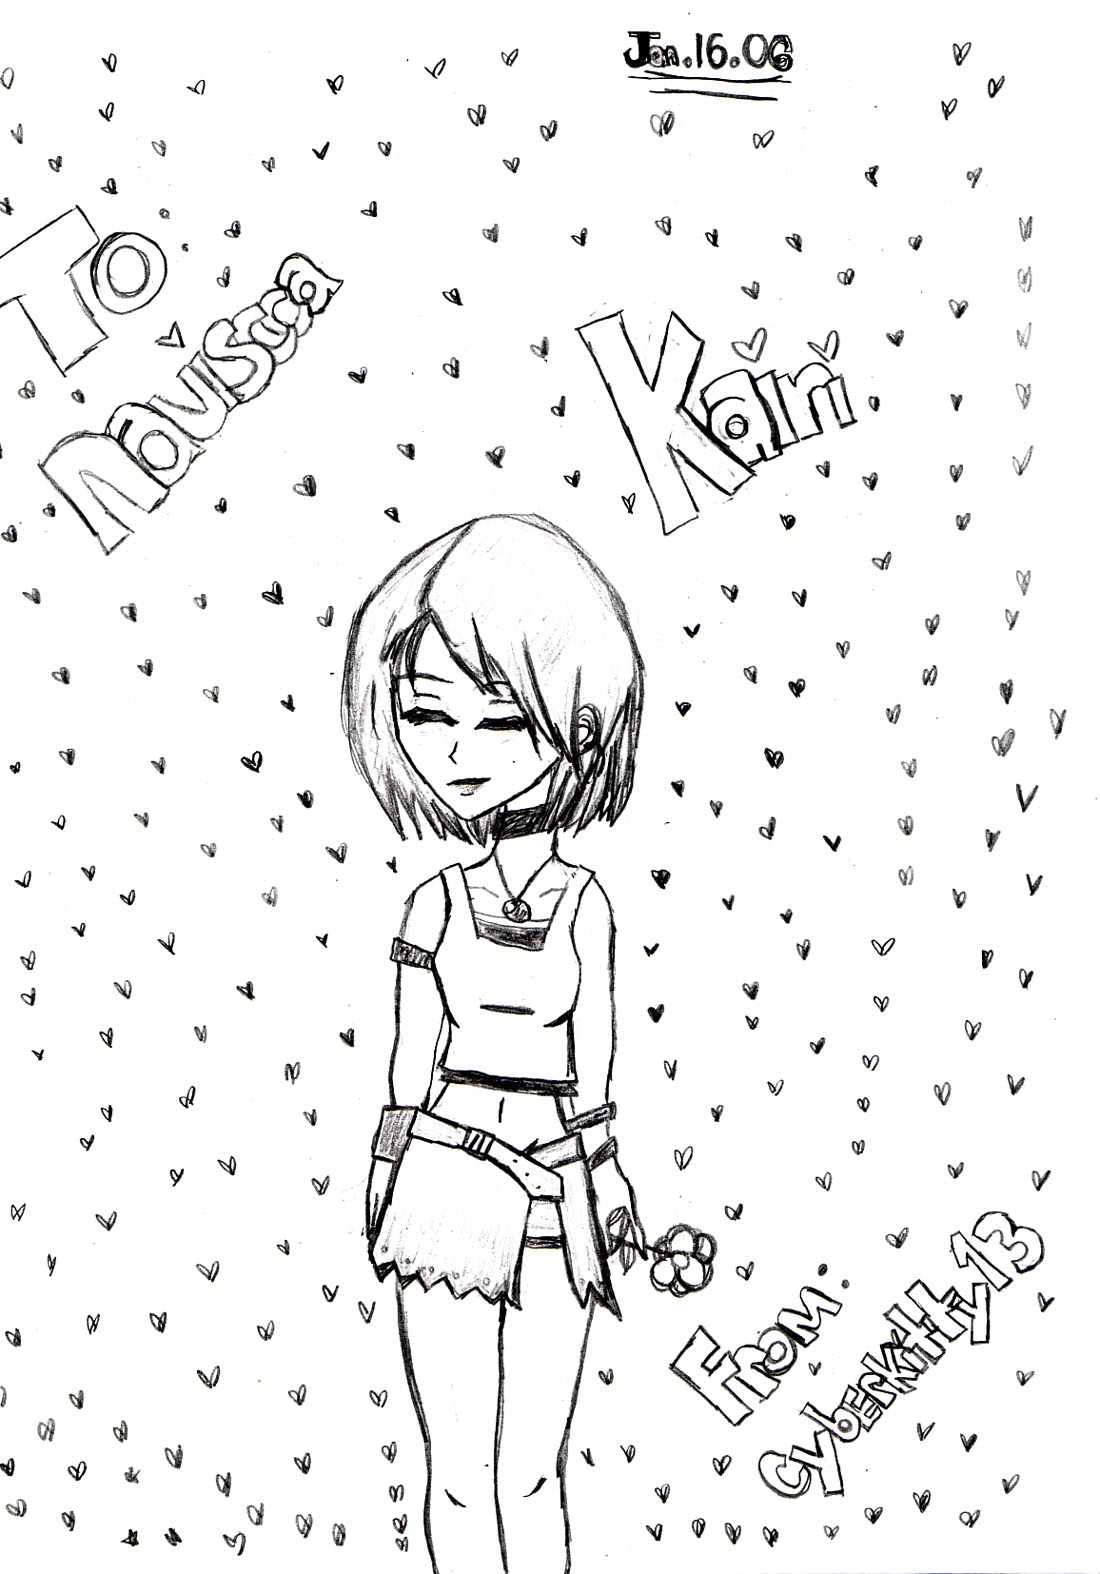 Request- 'Kairi' for nauiscca by cyberkitty13